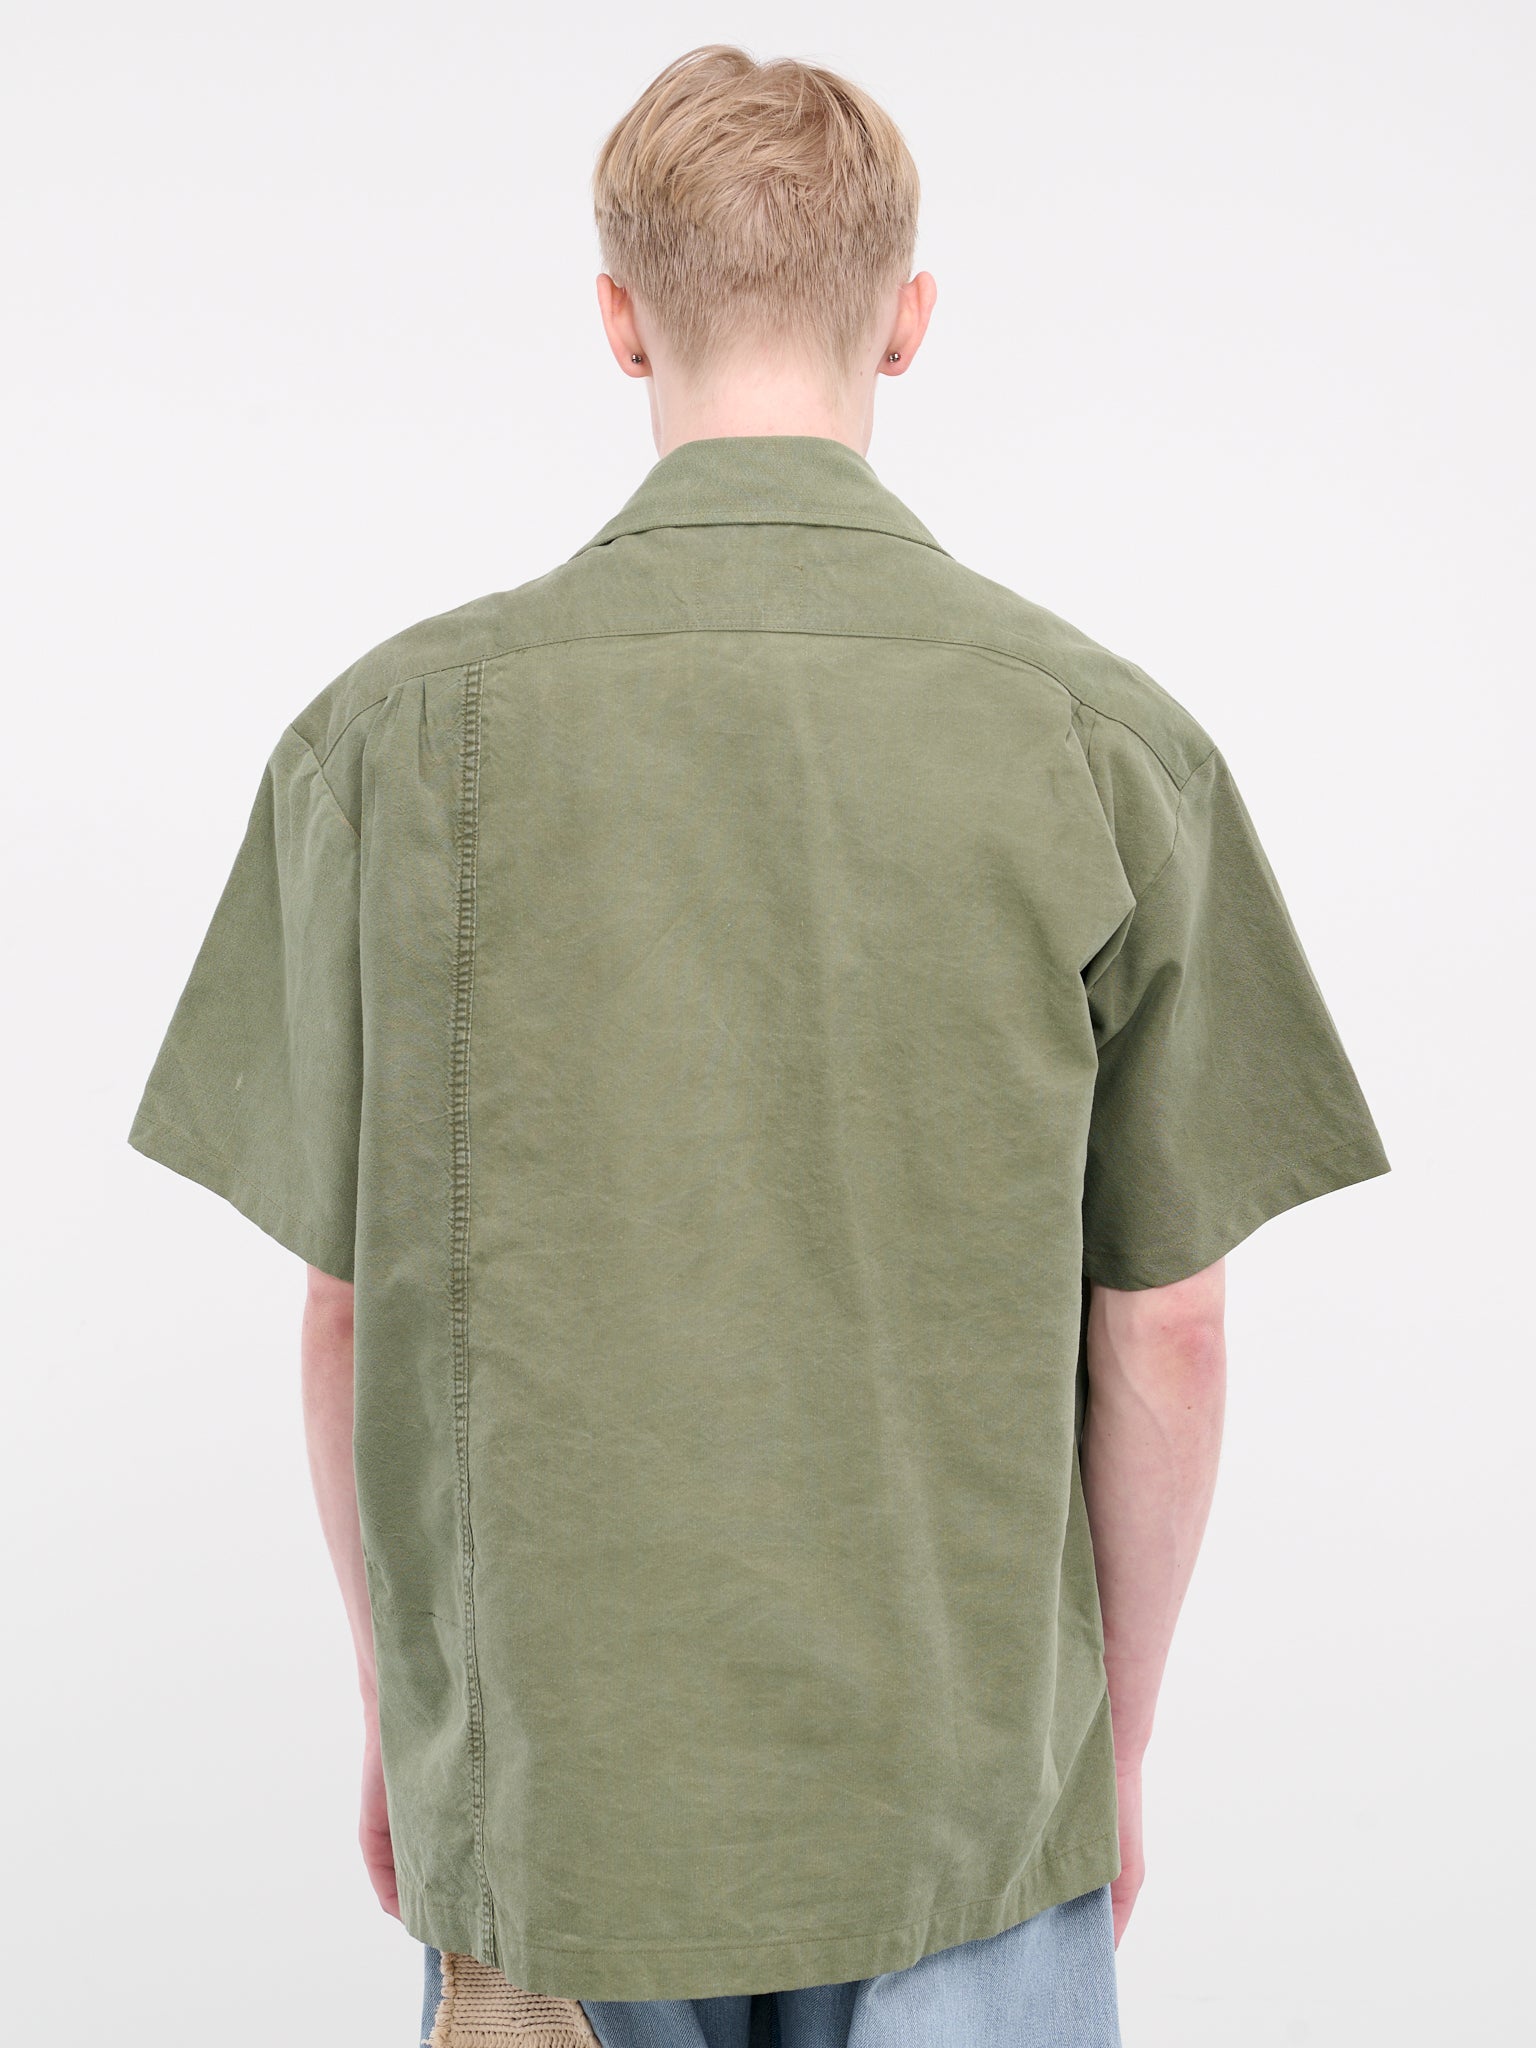 Army Tent Shirt (HM101-ARMY)